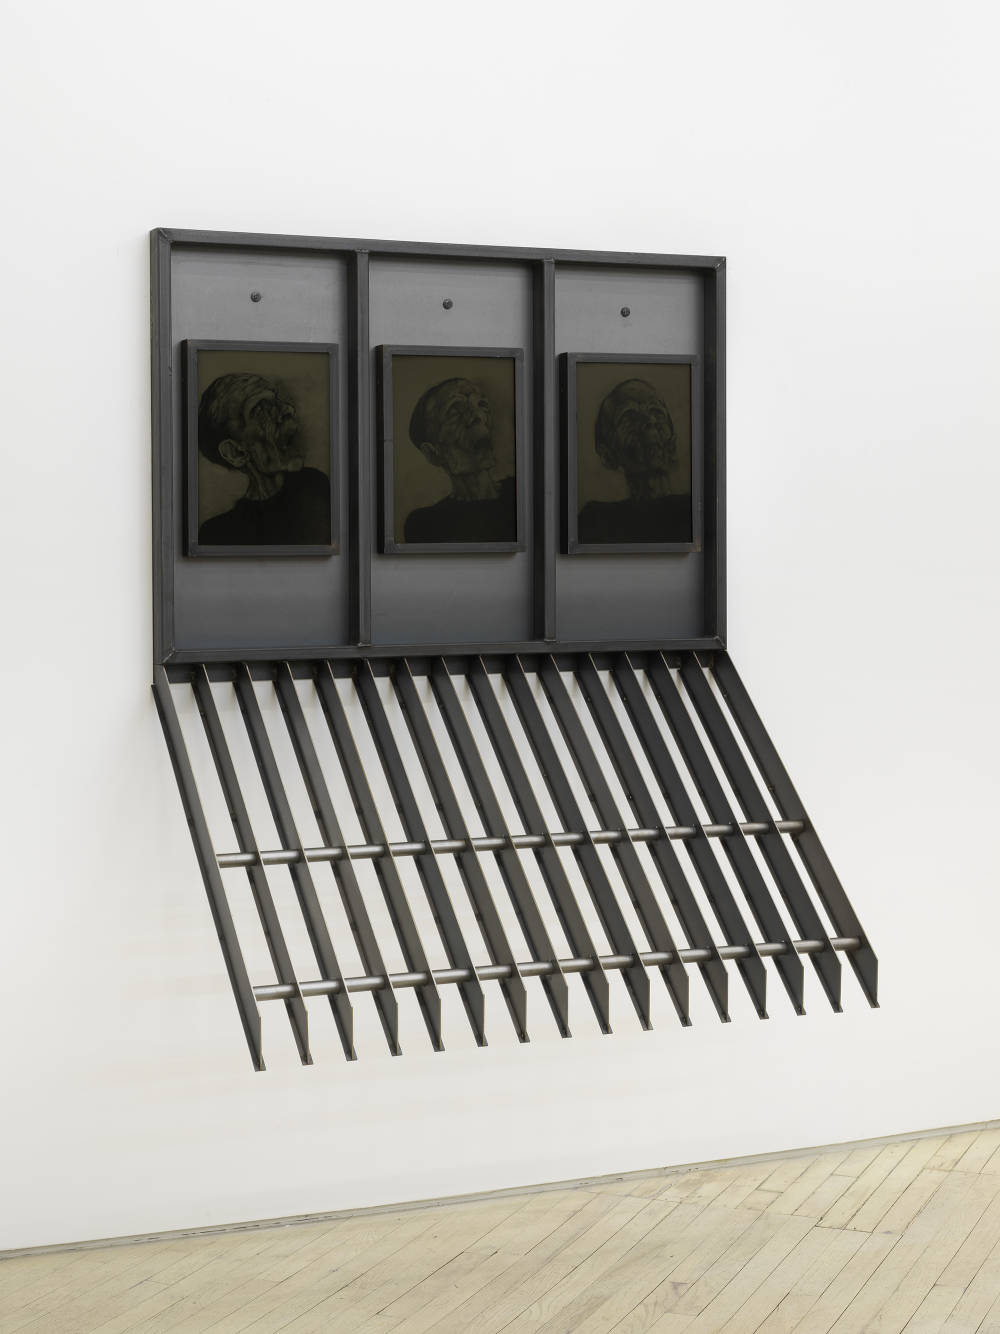 A large steel sculpture hanging from a wall containing three drawings a human head.